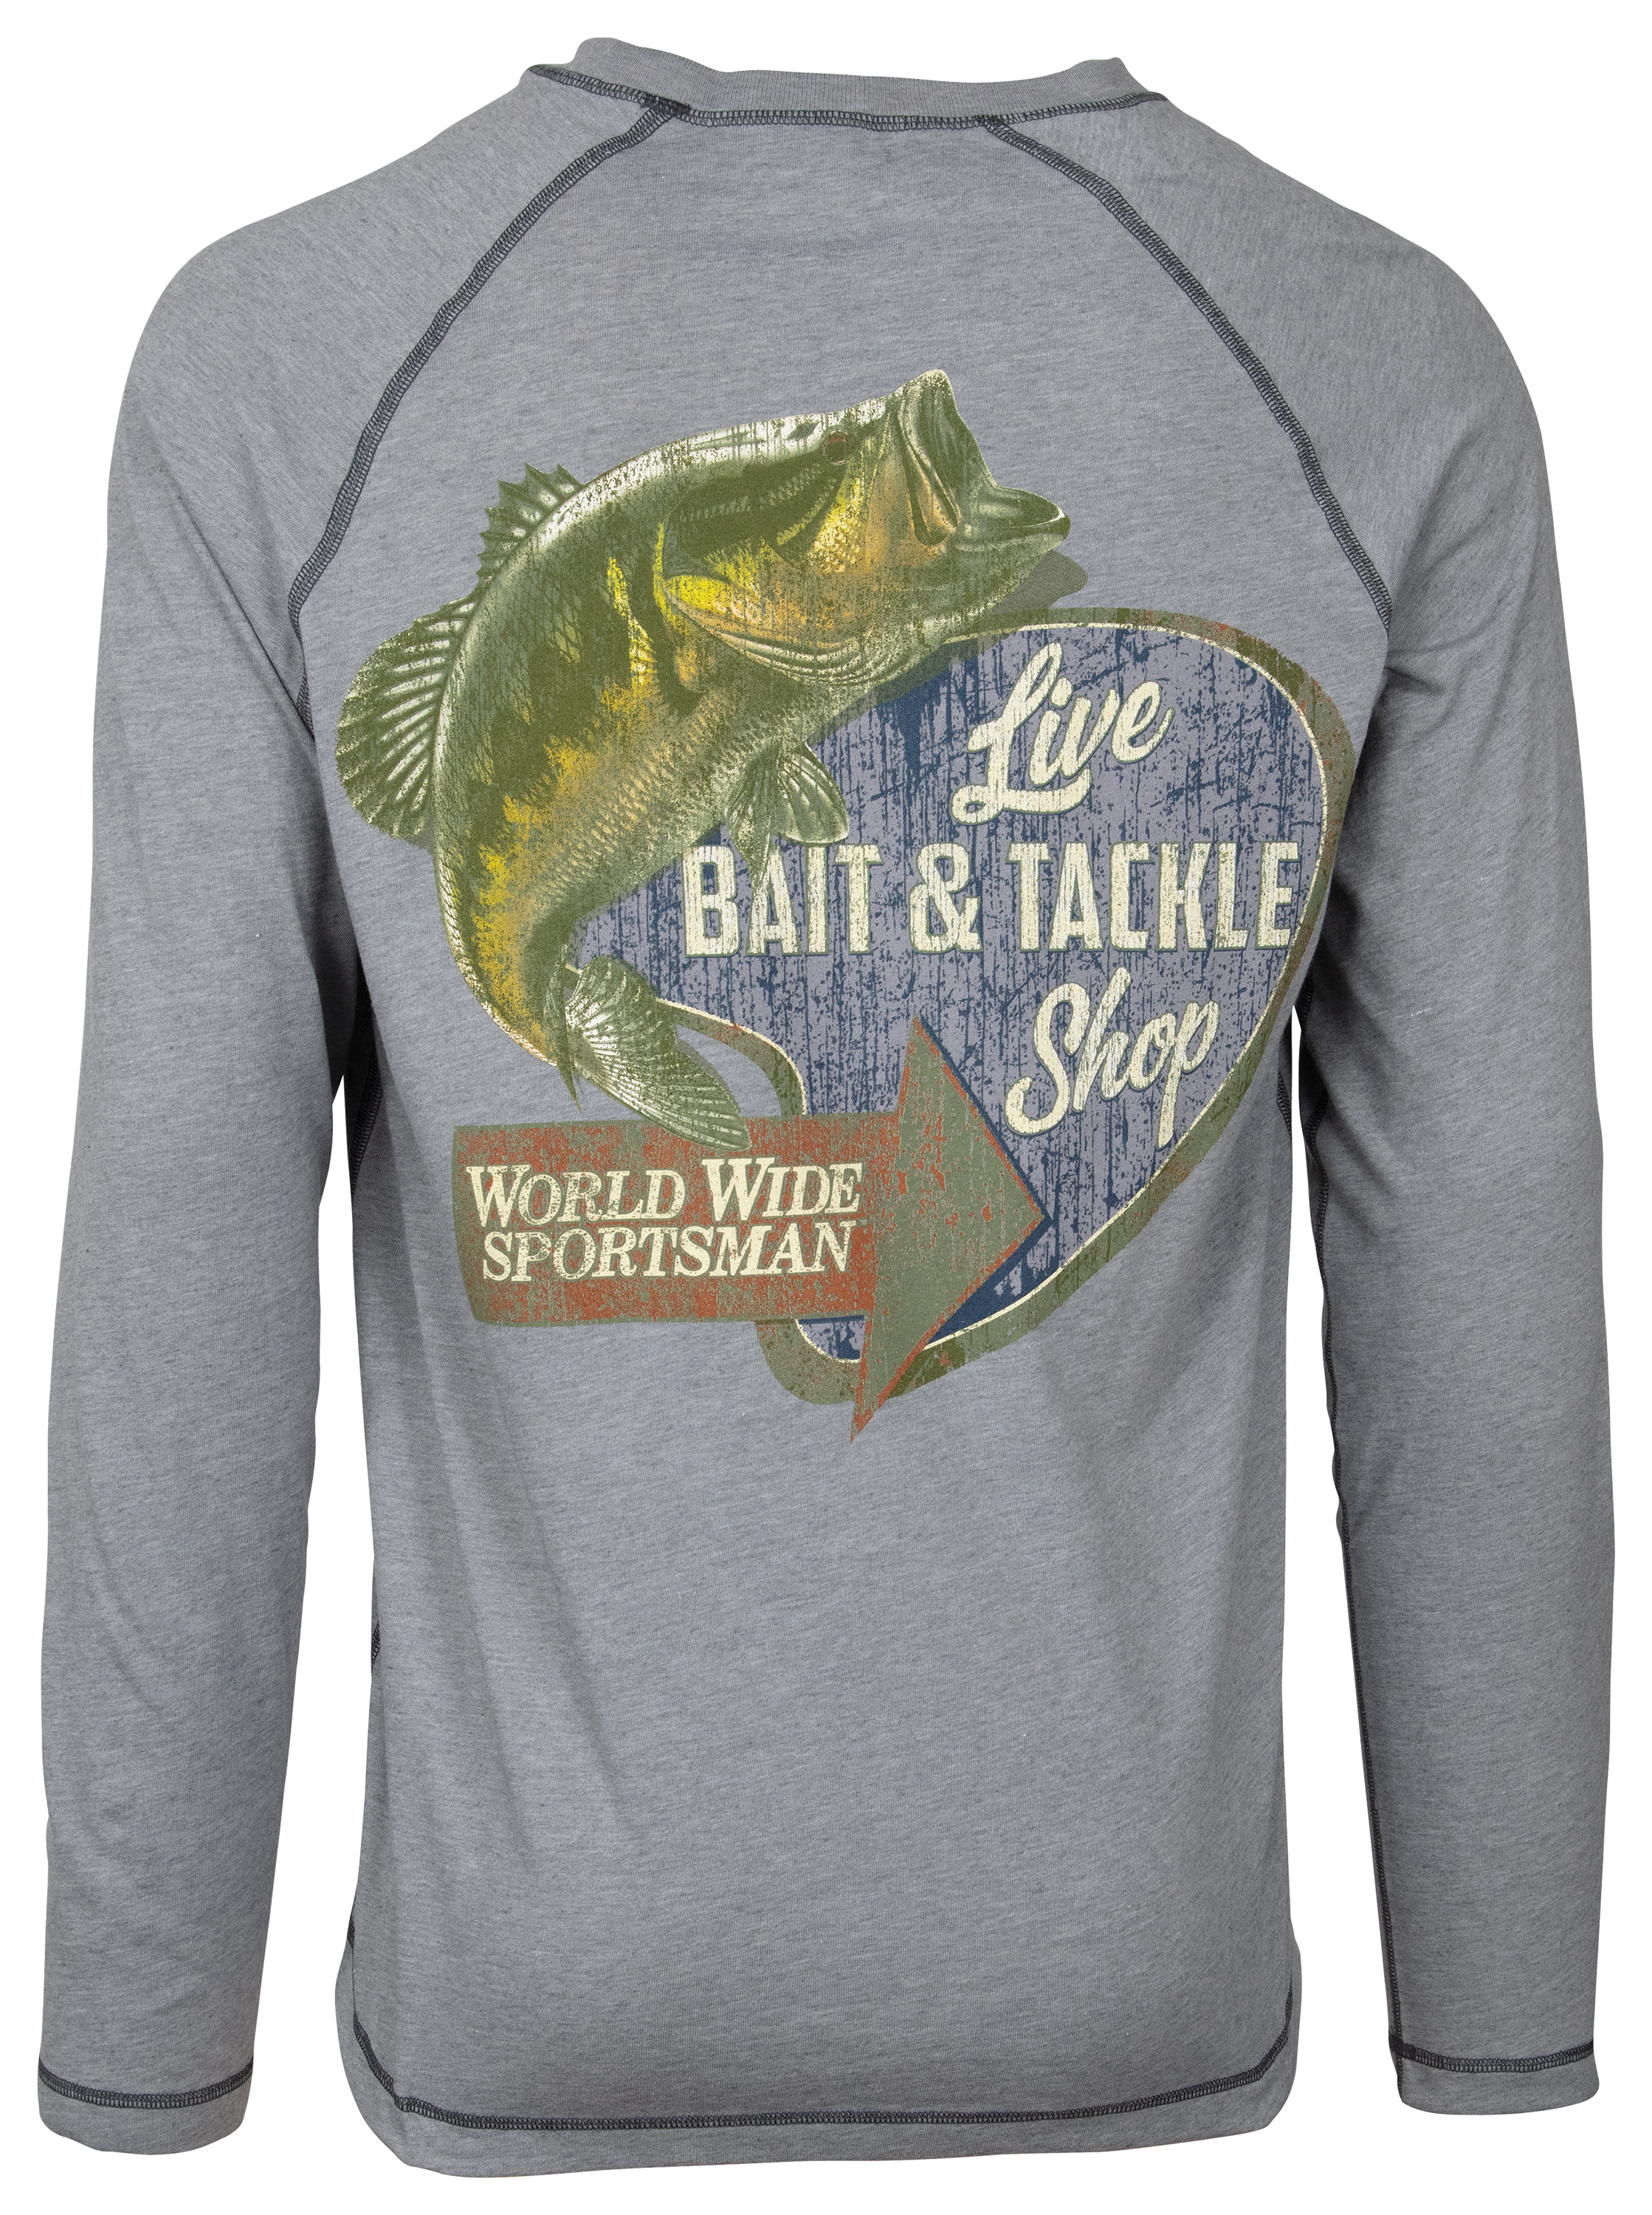 World Wide Sportsman Vintage Bait and Tackle Long-Sleeve Crew Neck T-Shirt for Men - Dark Gray - S